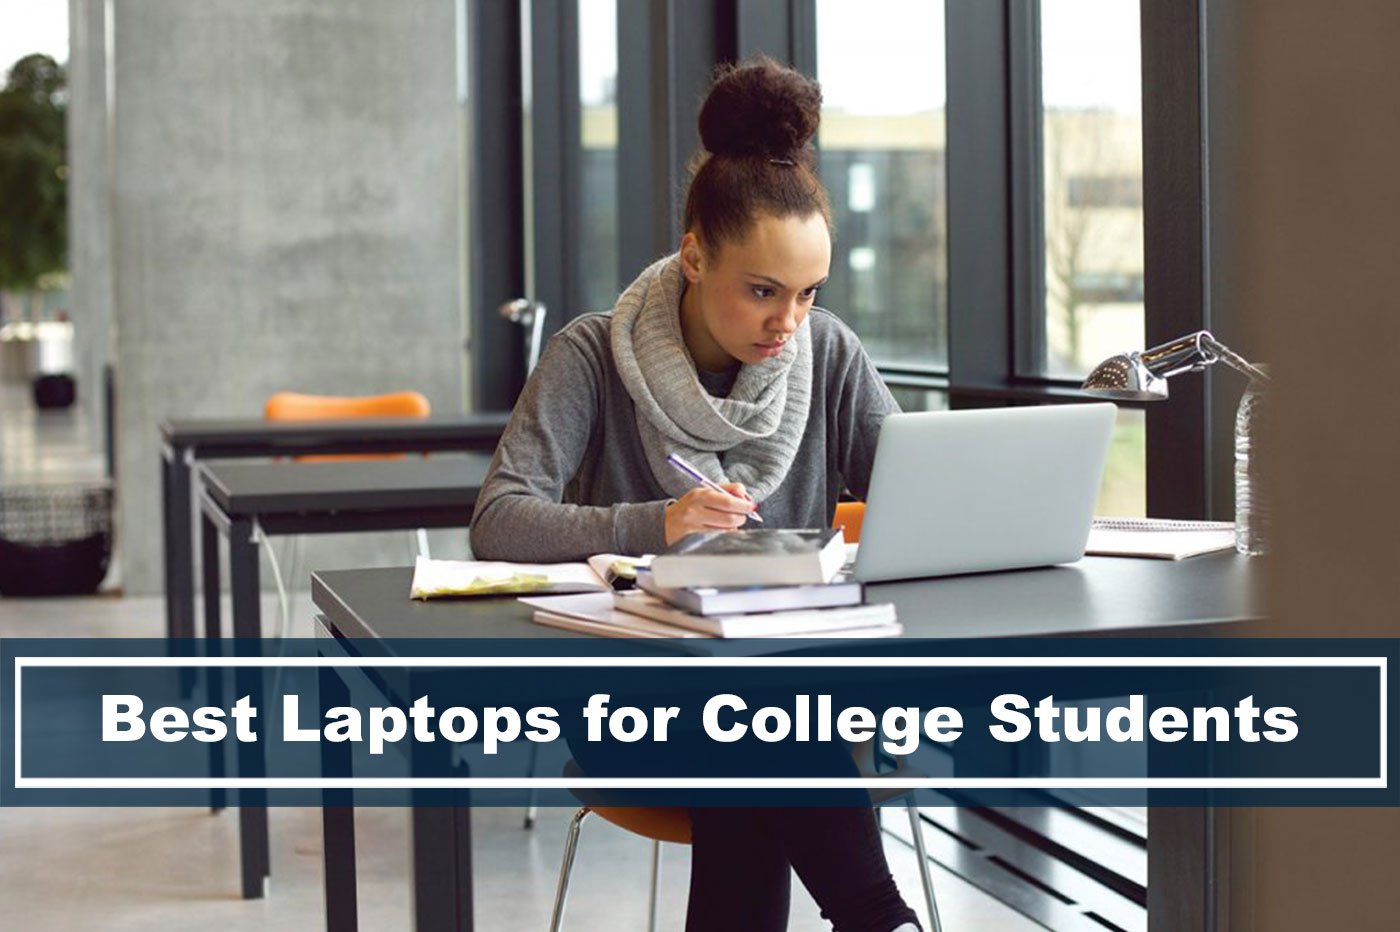 7 Best Laptops For College Students In 2019 Reviewed For Any Major